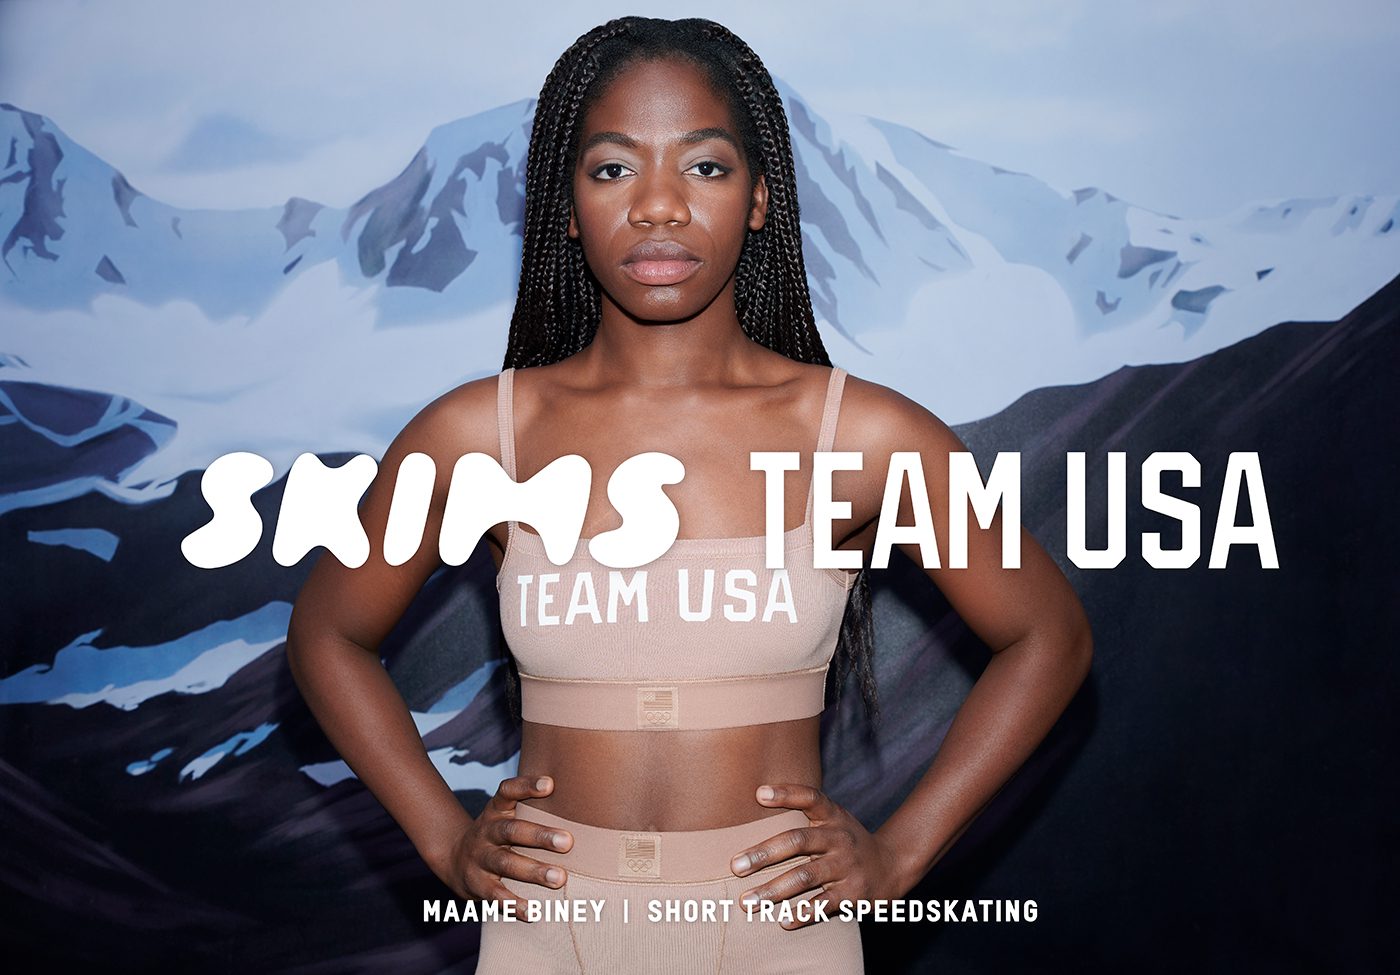 Skims Continues Their Team USA Partnership Releasing A New Capsule